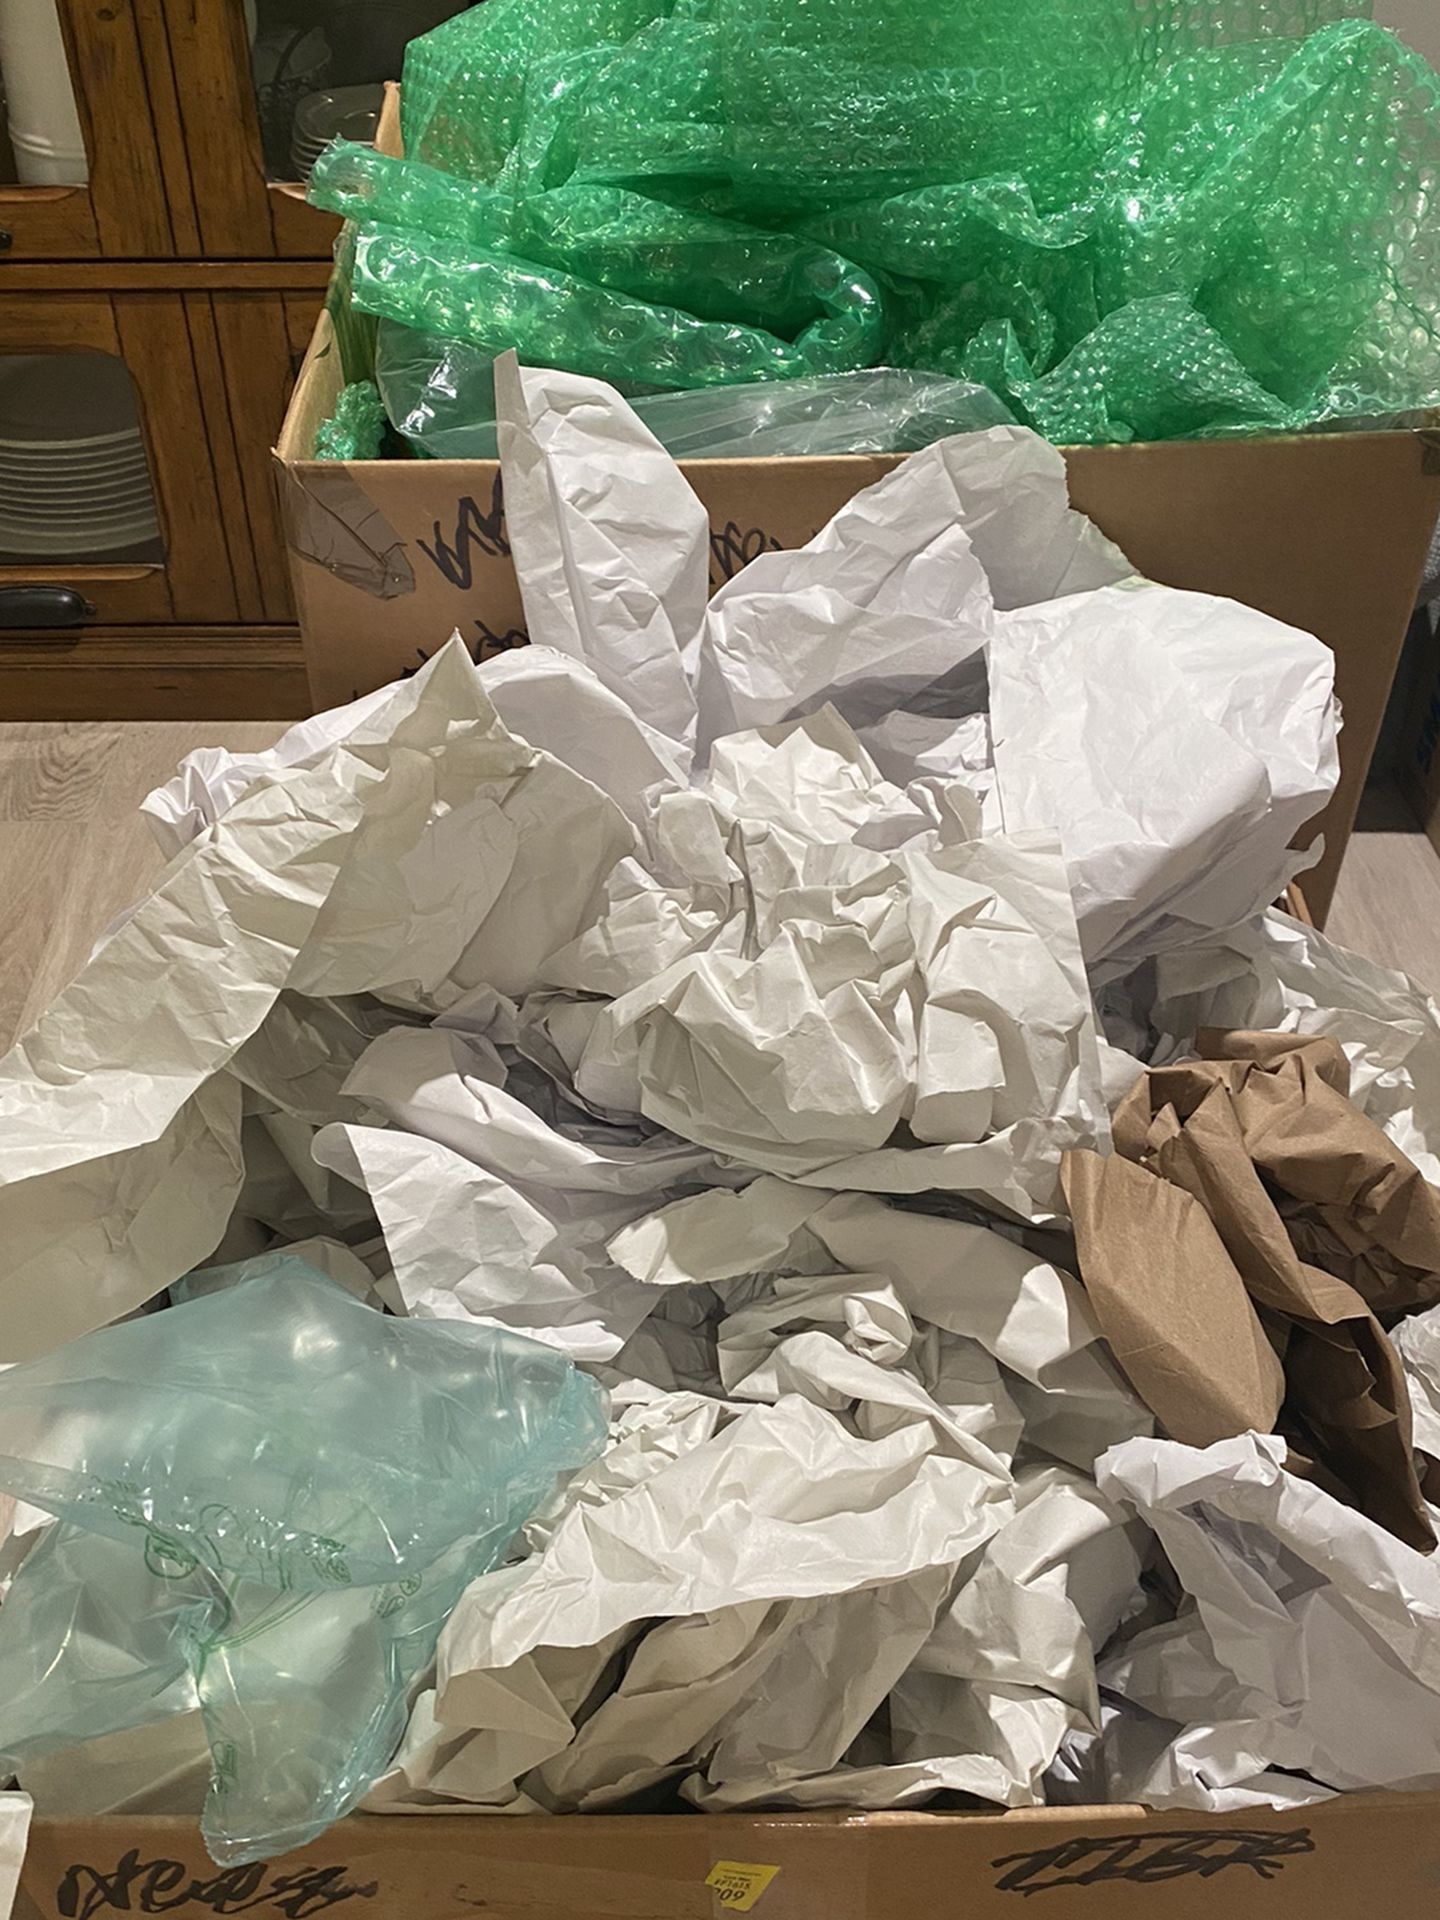 ****Free! Packing Paper Supplies/ Bubble Wrap